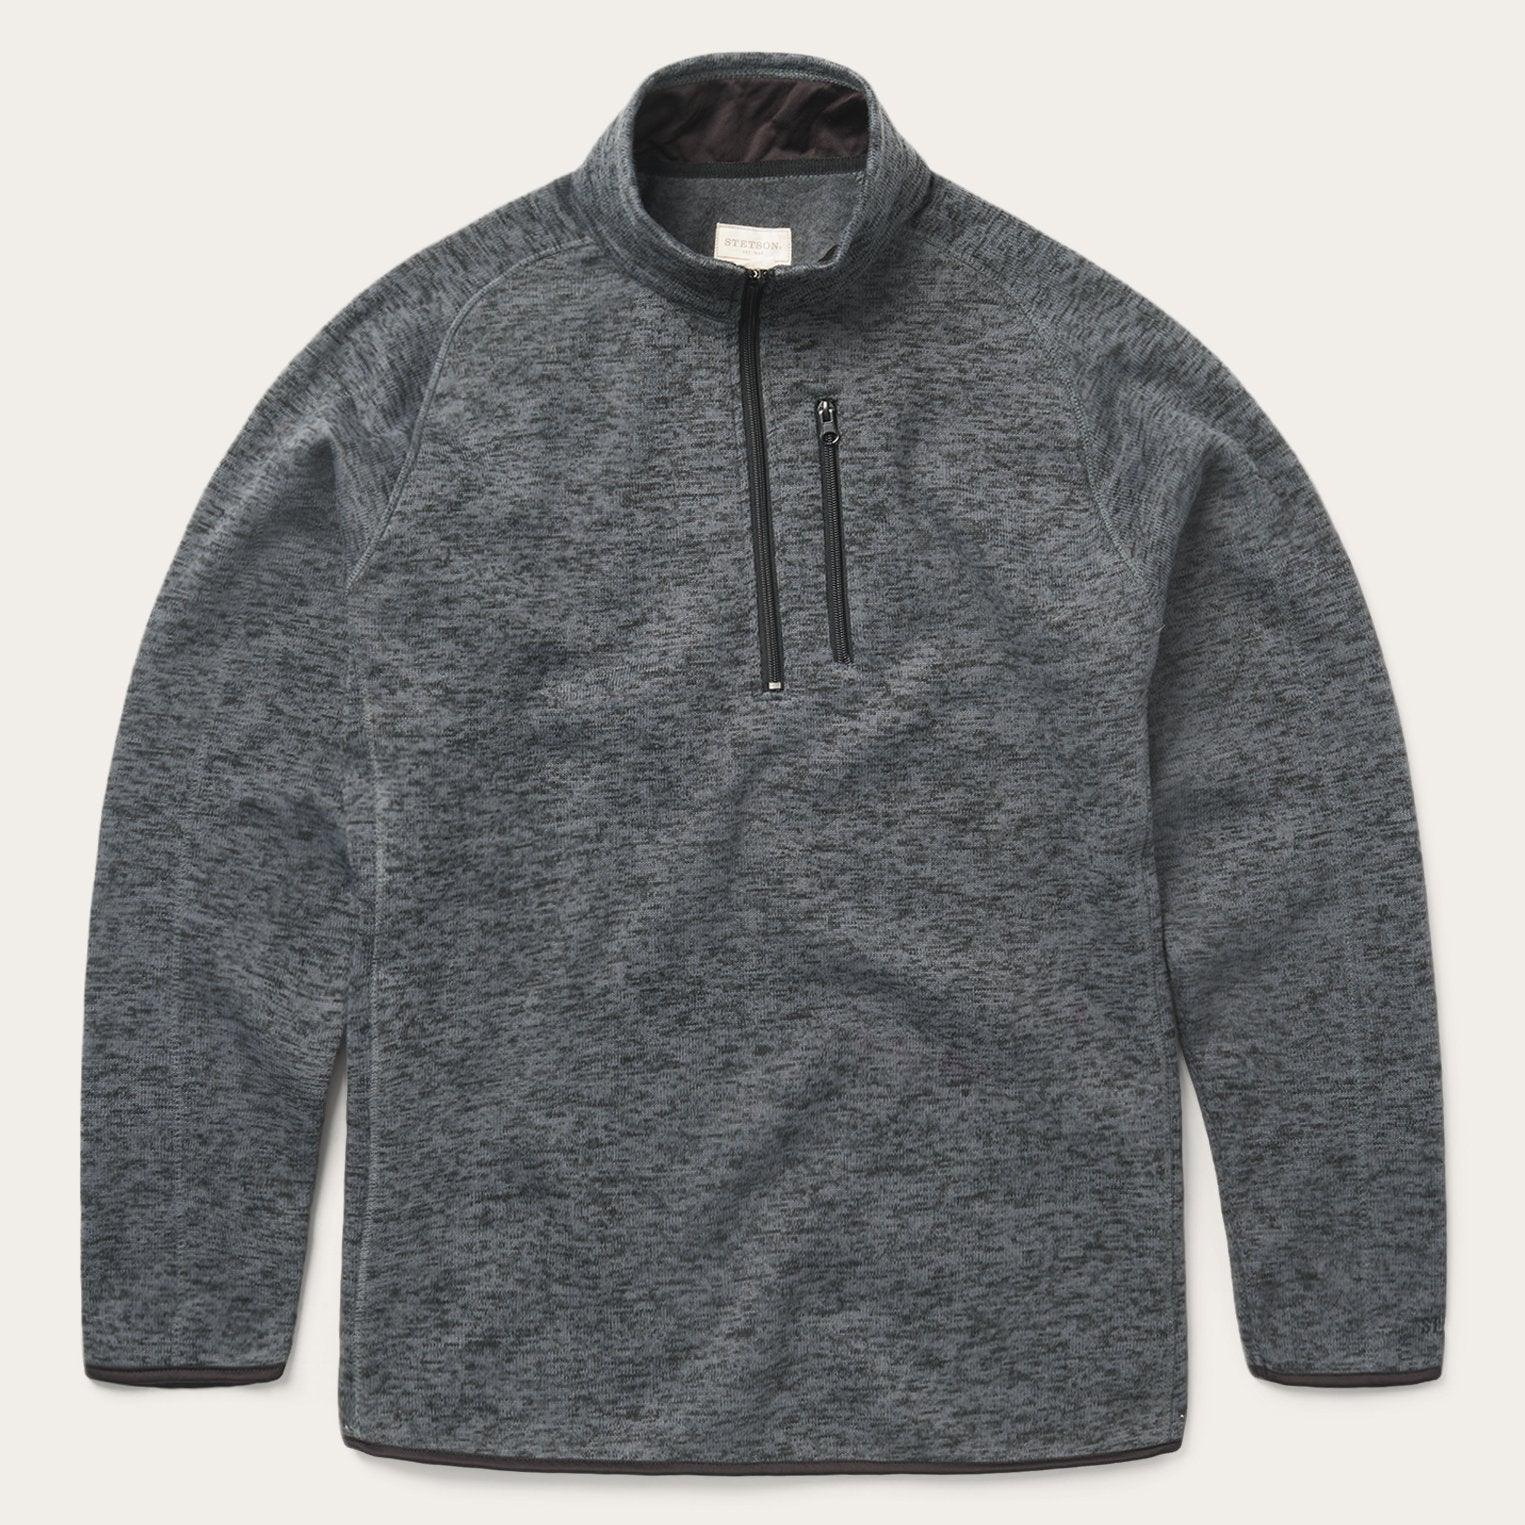 Stetson Pullover Knit Sweater - Flyclothing LLC